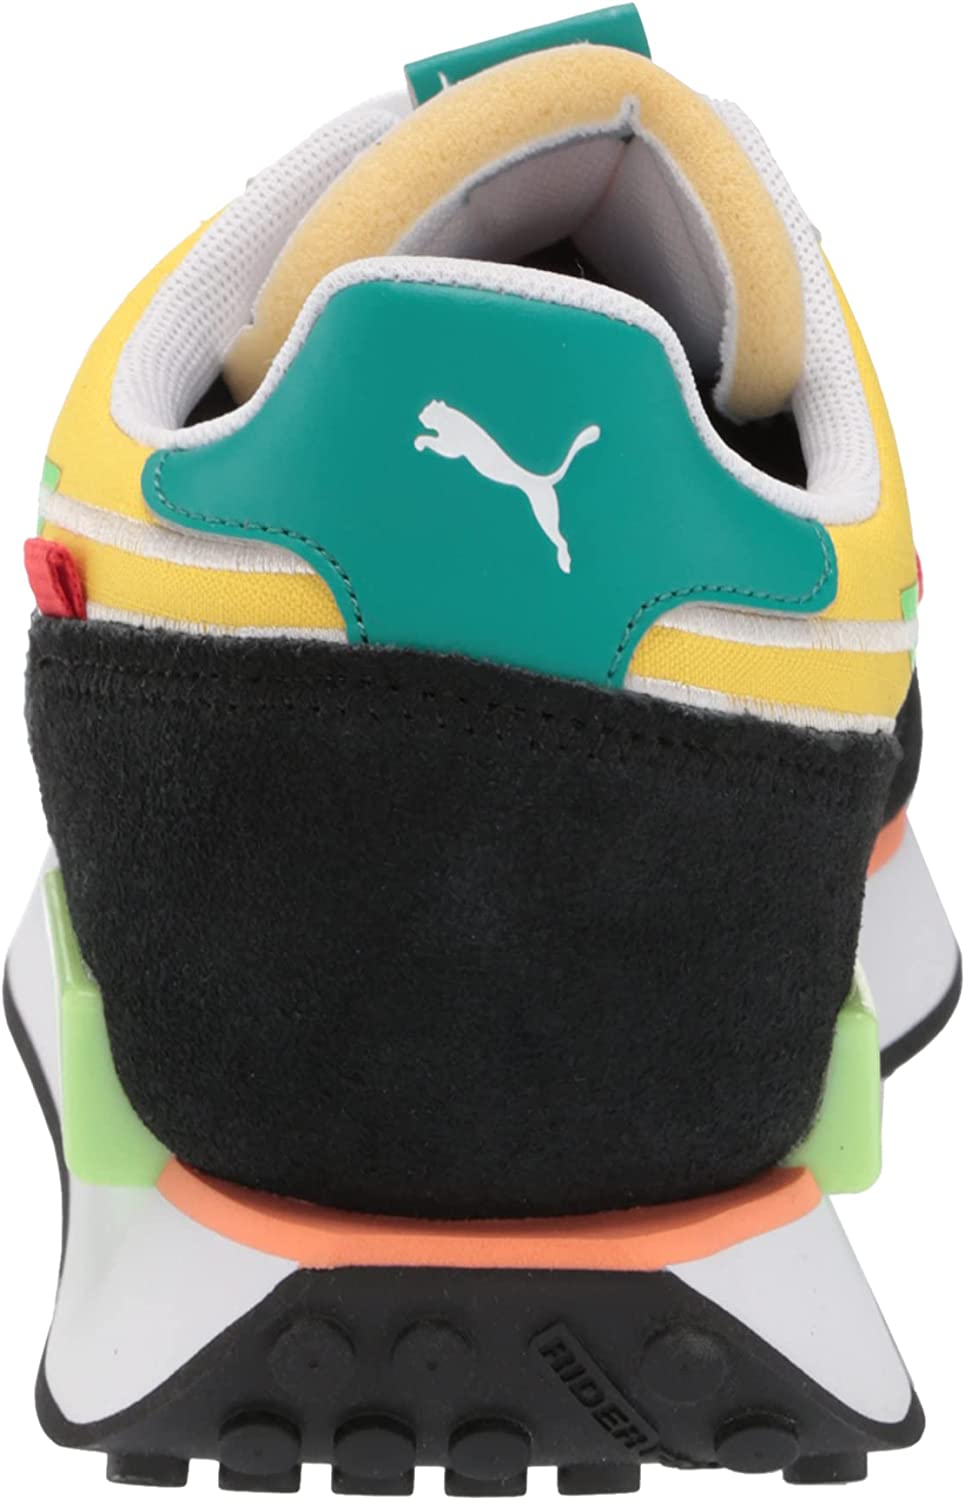 PUMA Mens Future Rider Twofold Sneaker ROY/M-8 - image 3 of 4